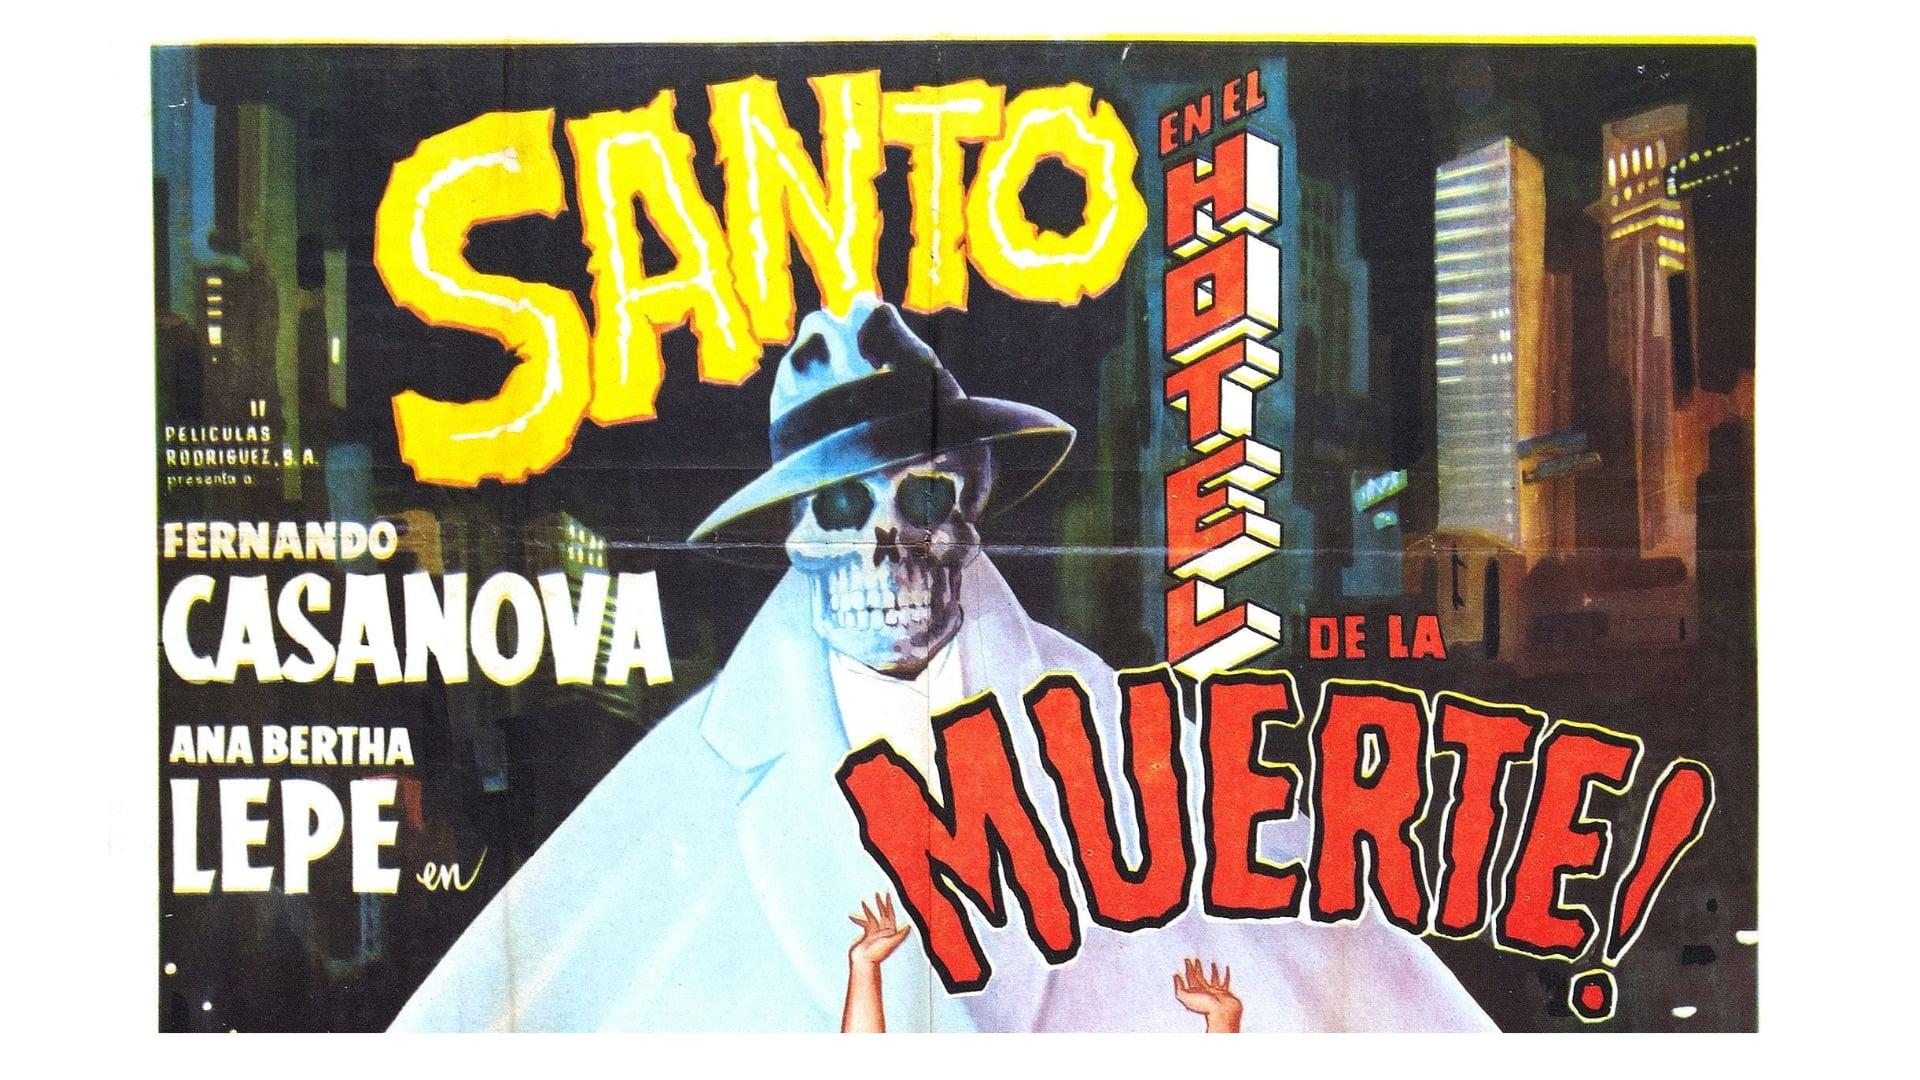 Santo in the Hotel of Death backdrop